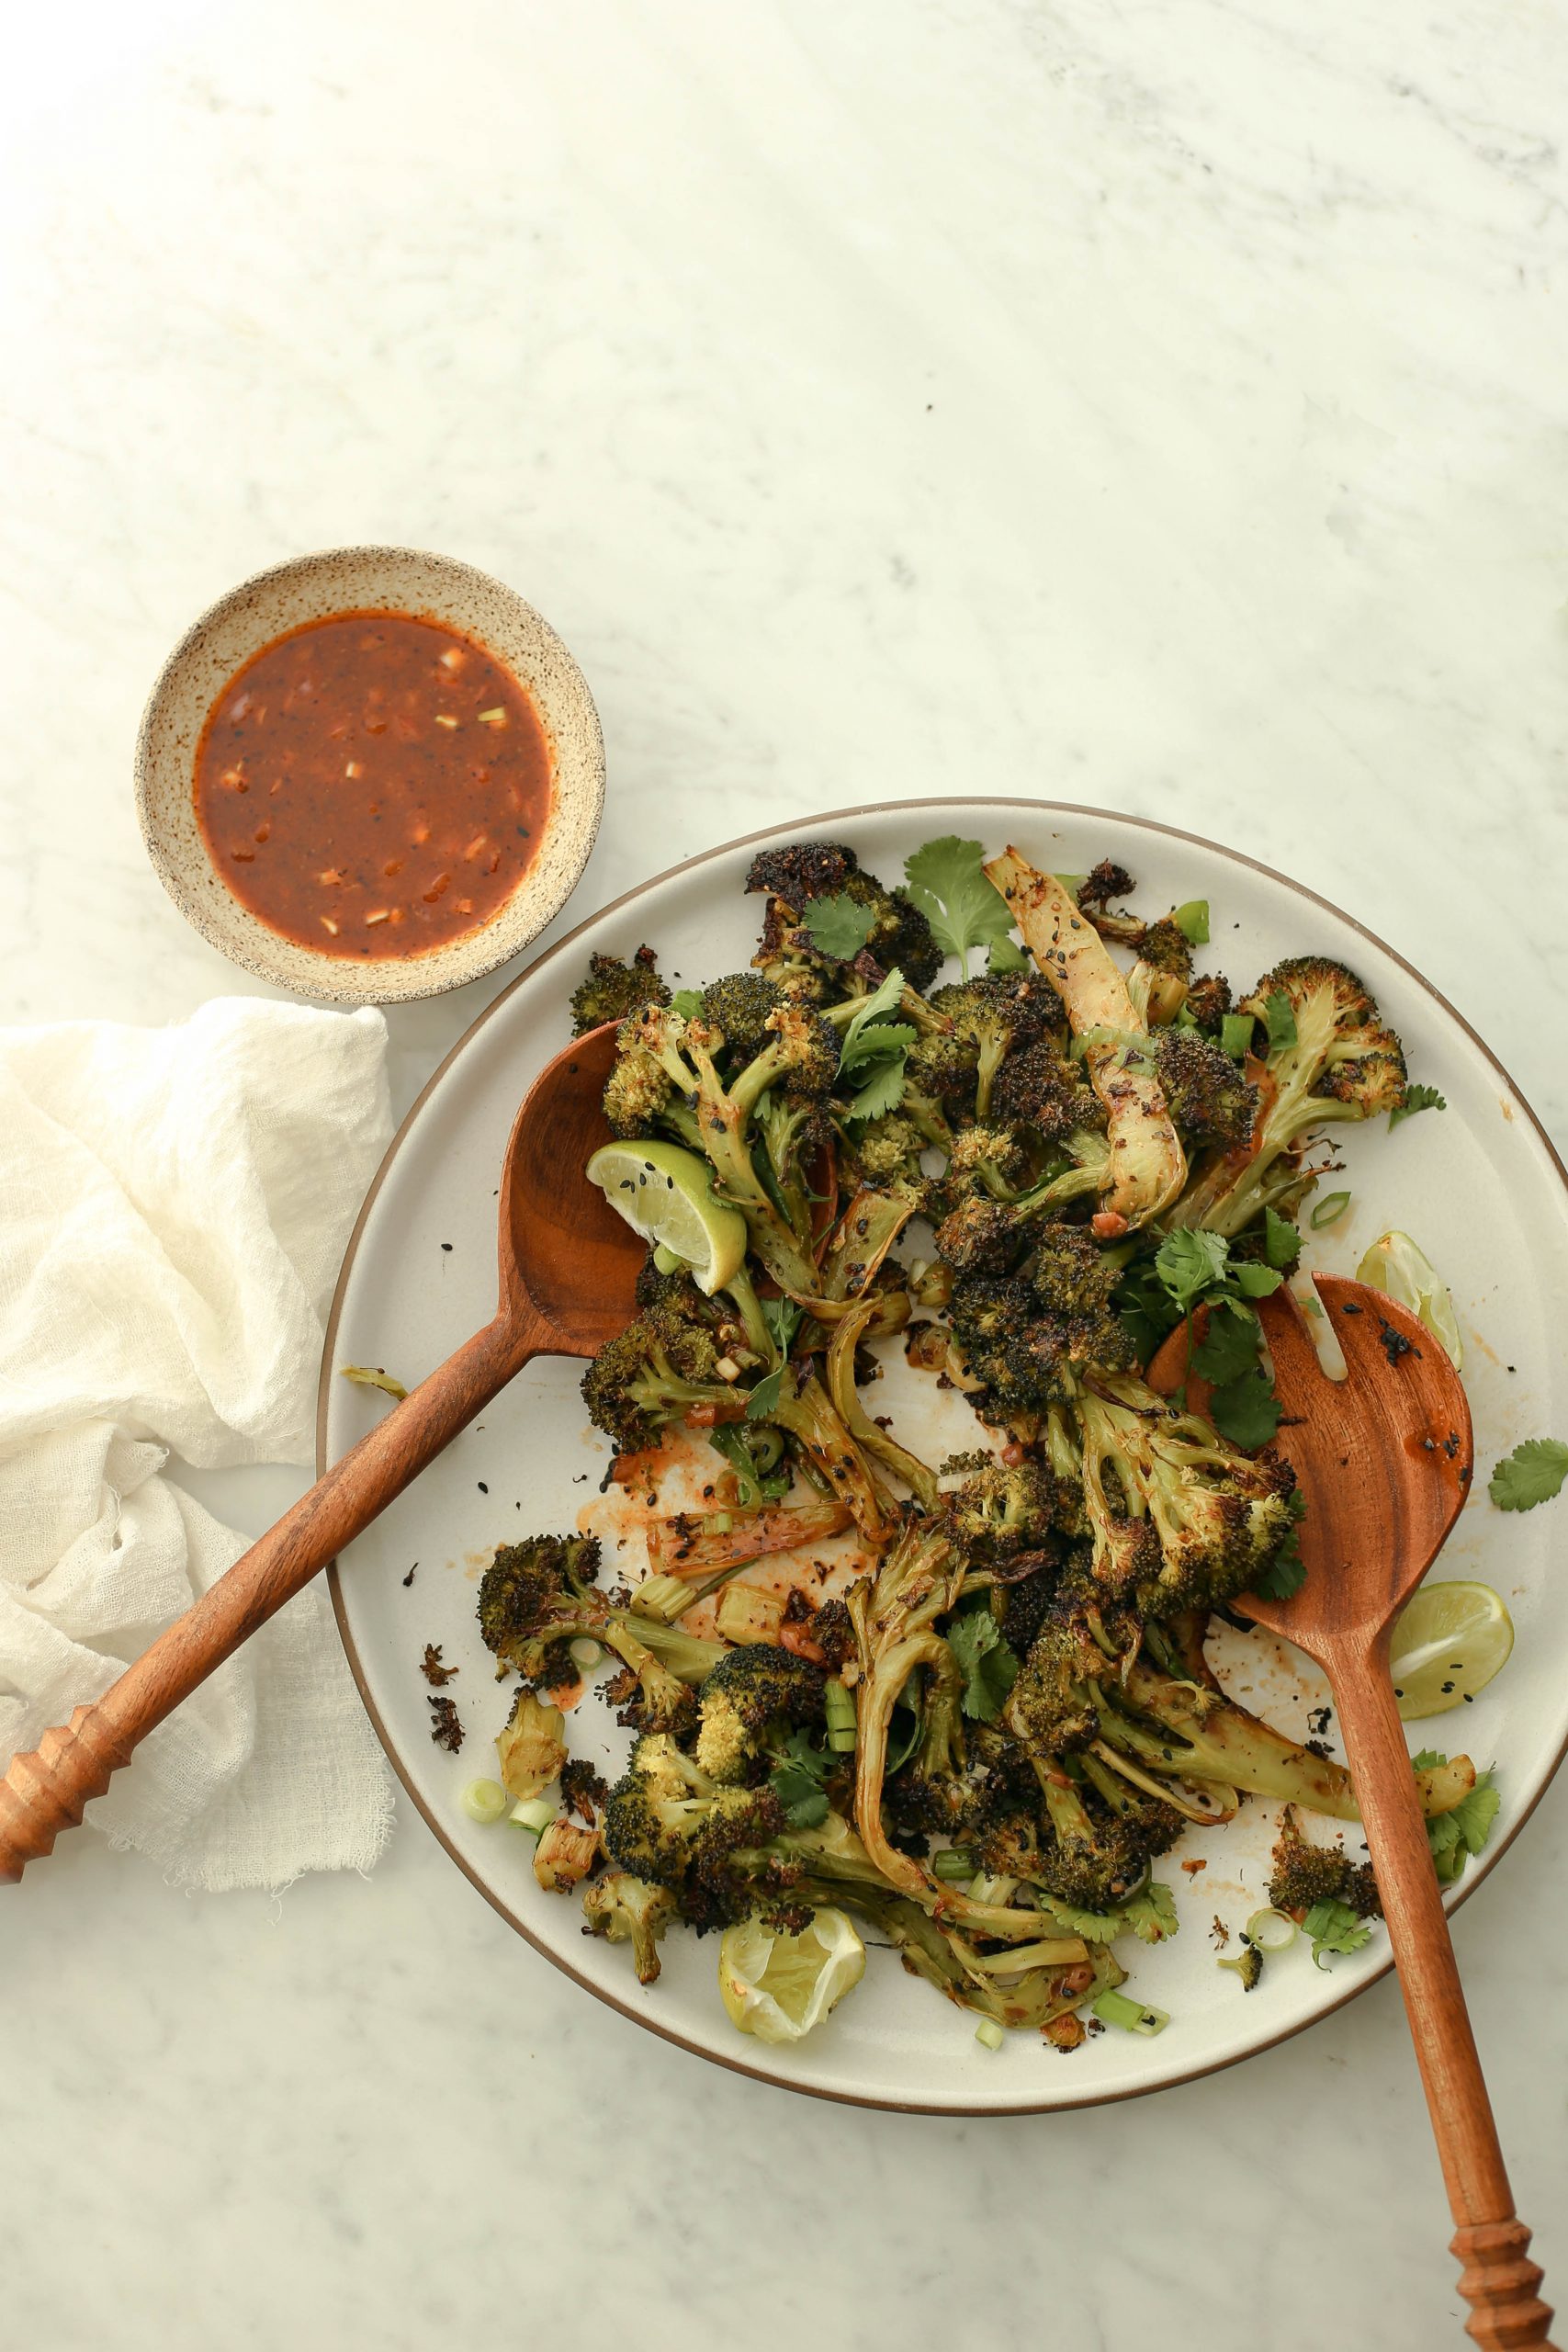 Level Up Your Broccoli Game—This Roasted Chili Miso Version Is The Answer